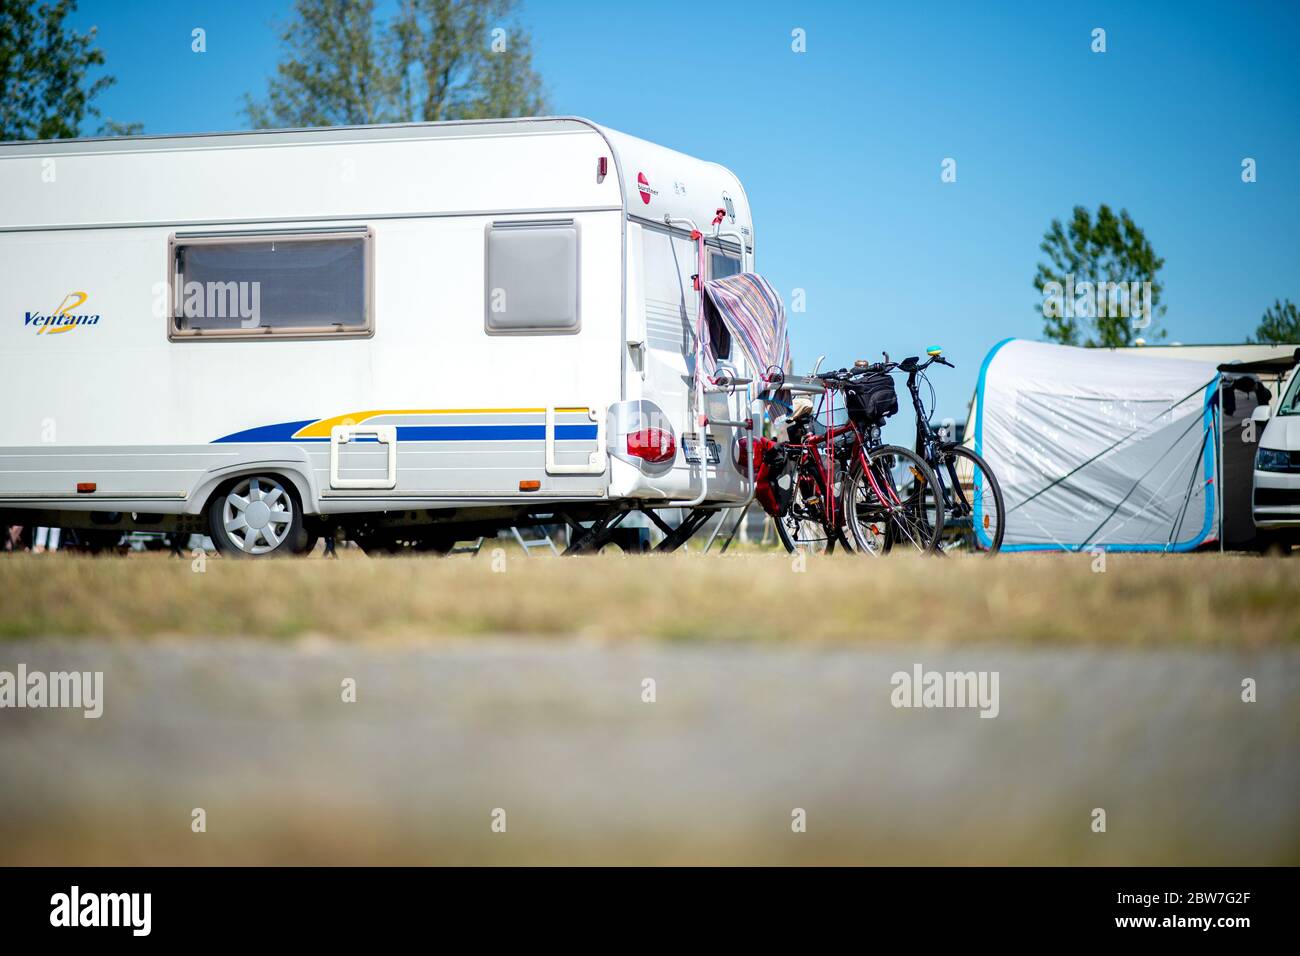 Germany Campsites High Resolution Stock Photography and Images - Alamy